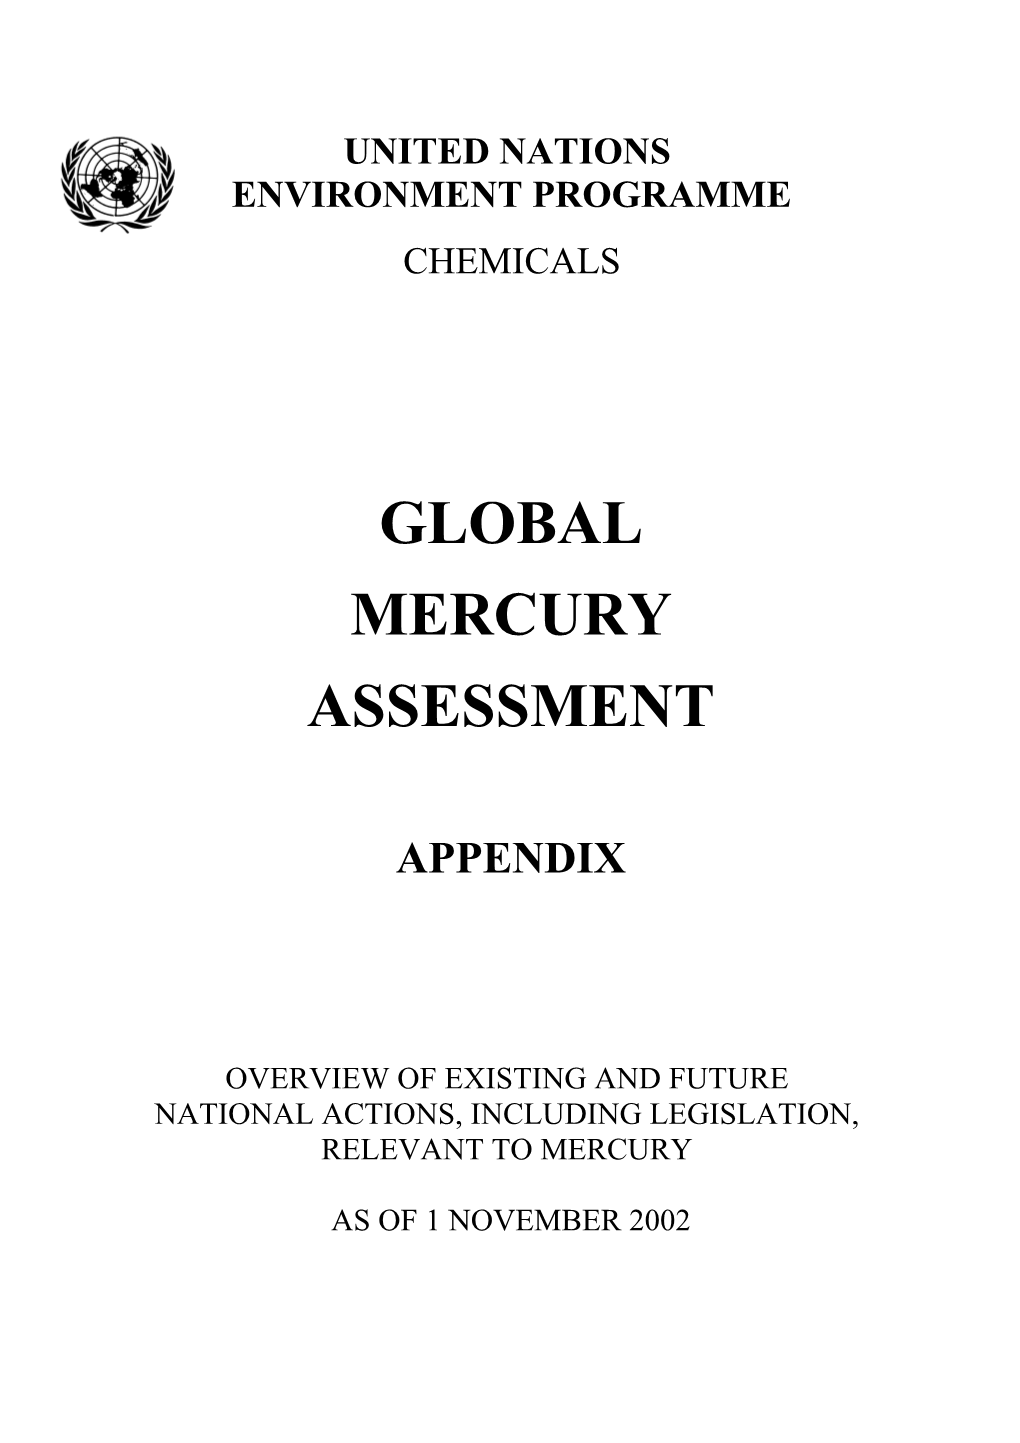 Overview of Existing and Future National Actions, Including Legislation, Relevant to Mercury